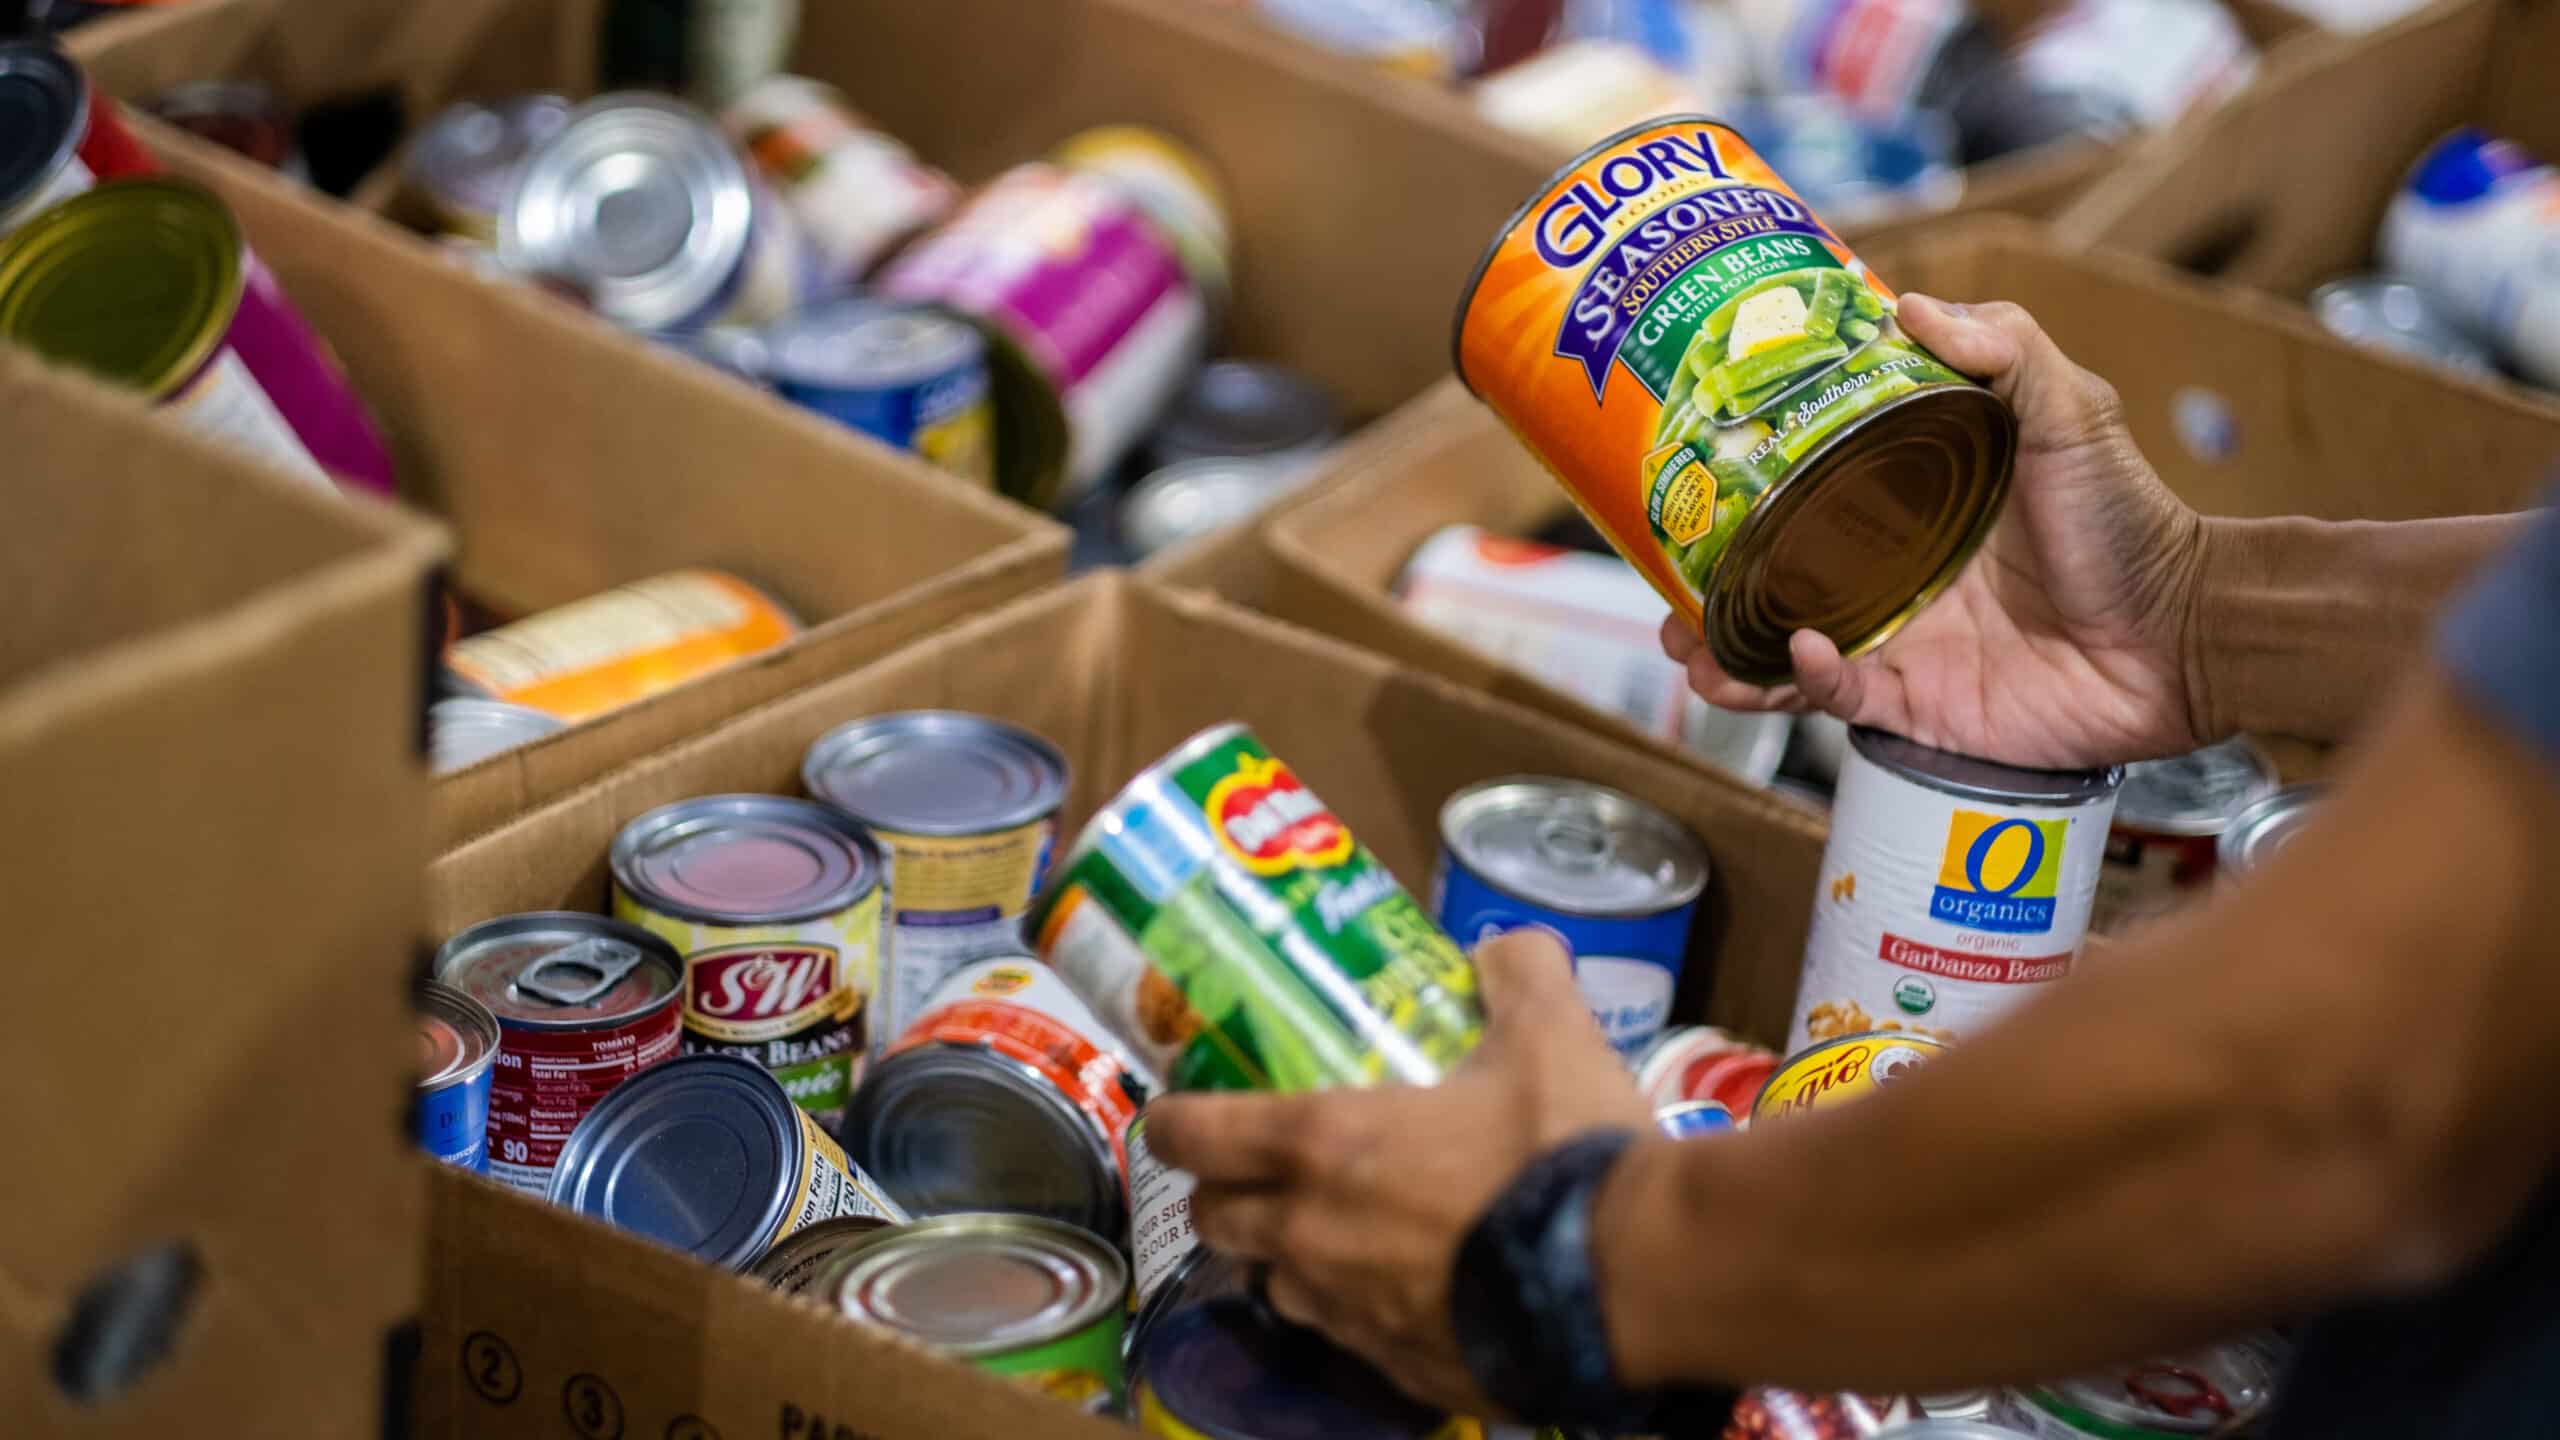 Does Canned Food Really Deserve a Bad Rap?